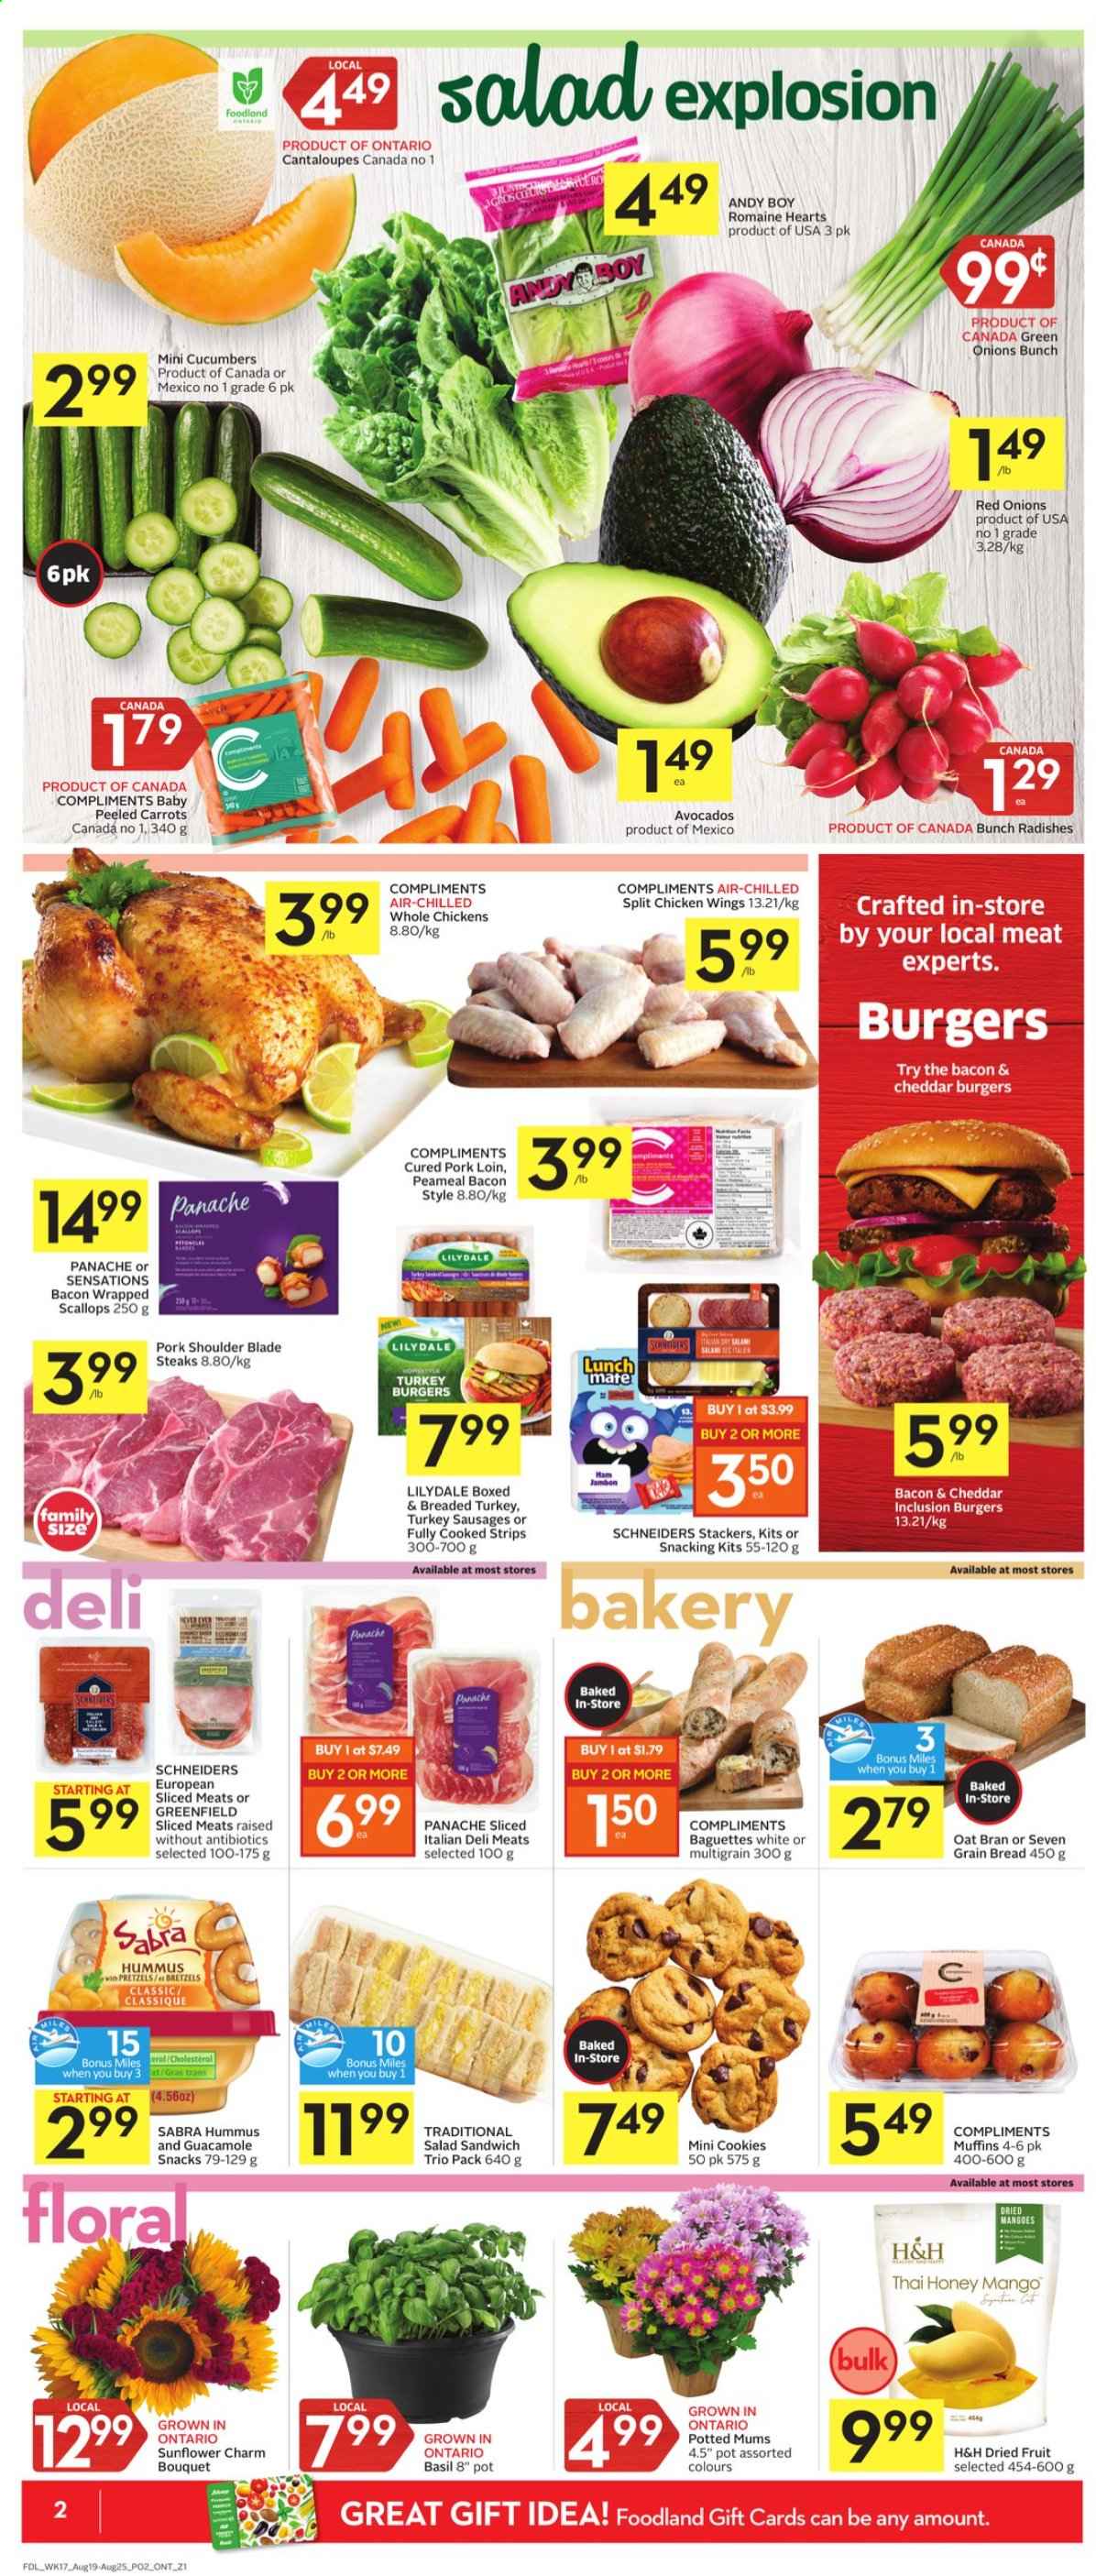 thumbnail - Foodland Flyer - August 19, 2021 - August 25, 2021 - Sales products - bread, pretzels, muffin, cantaloupe, carrots, cucumber, radishes, red onions, salad, green onion, mango, bacon wrapped scallops, scallops, sandwich, hamburger, bacon, sausage, hummus, guacamole, cheese, Flora, chicken wings, strips, cookies, snack, oats, esponja, honey, dried fruit, whole chicken, turkey burger, pork loin, pork meat, pork shoulder, steak. Page 2.